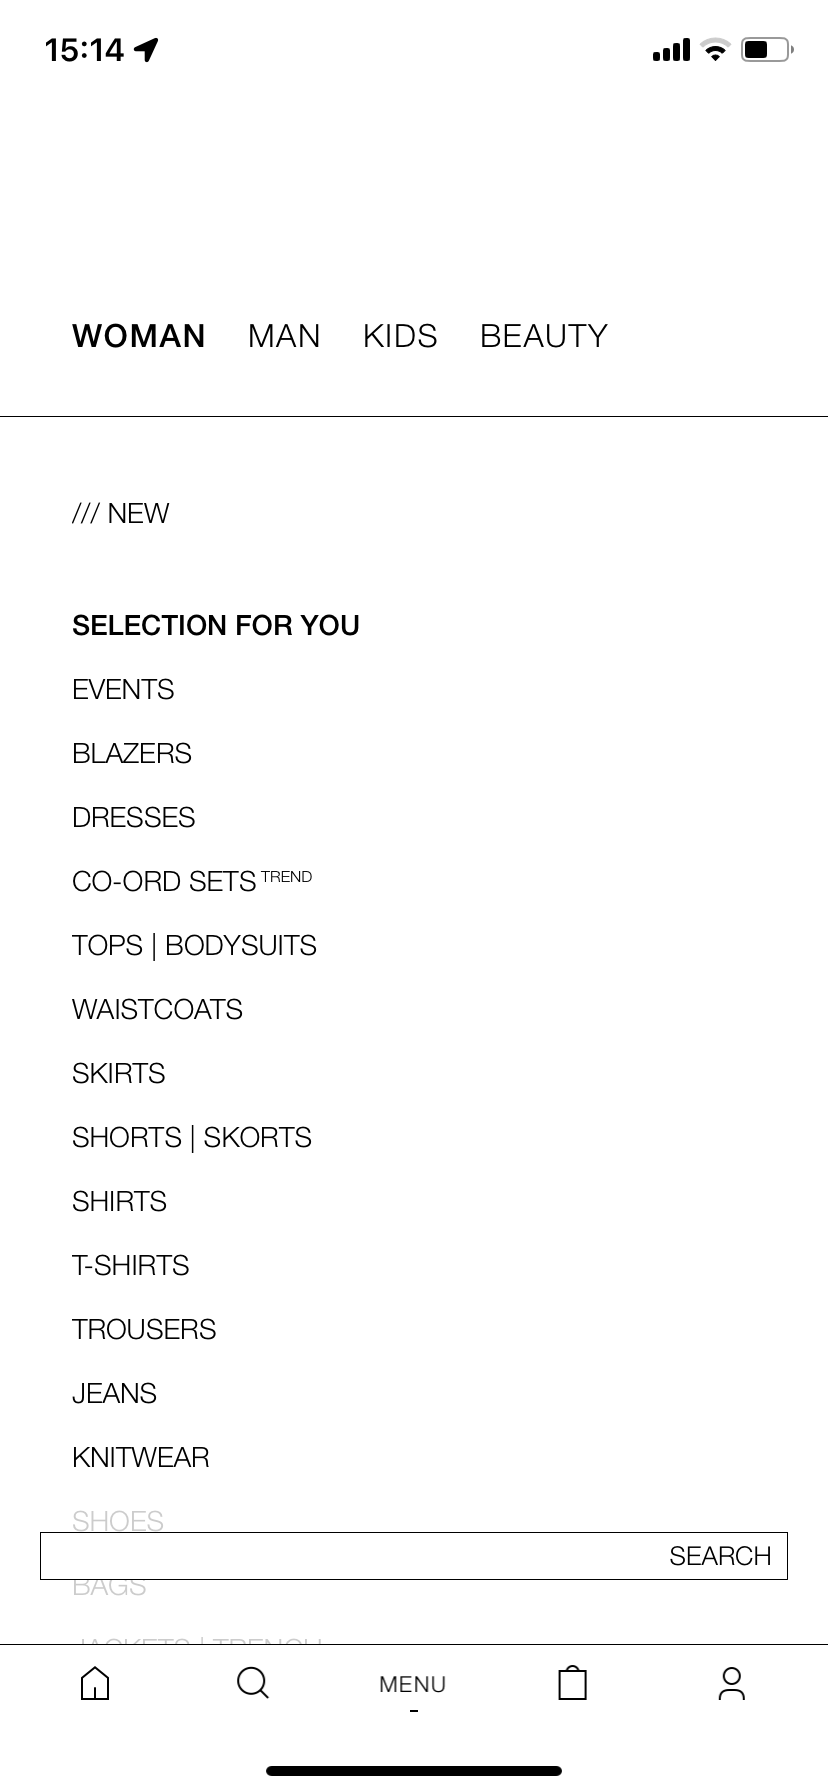 Zara's "Selection For You" feature displays products based on previous purchases, ensuring customers see items that fit their preferences. 